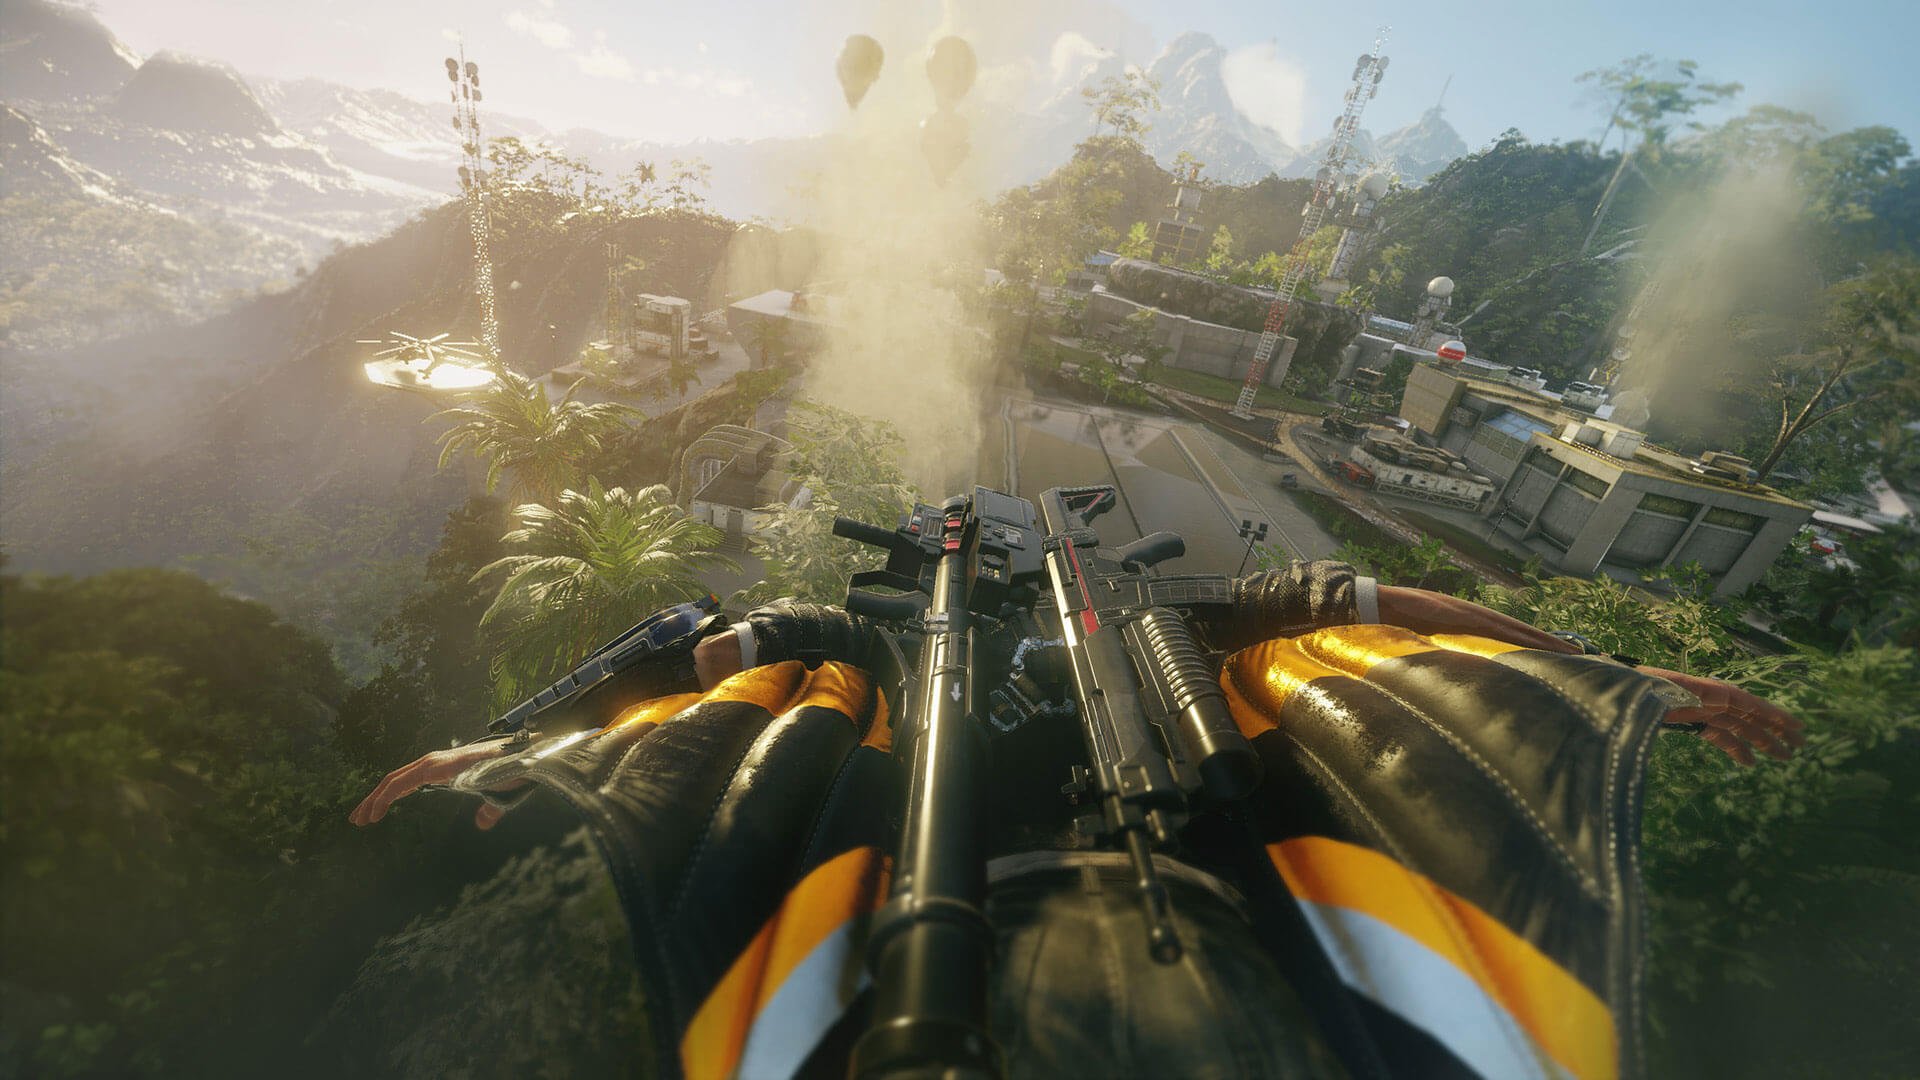 Rico flying towards a base in Just Cause 4